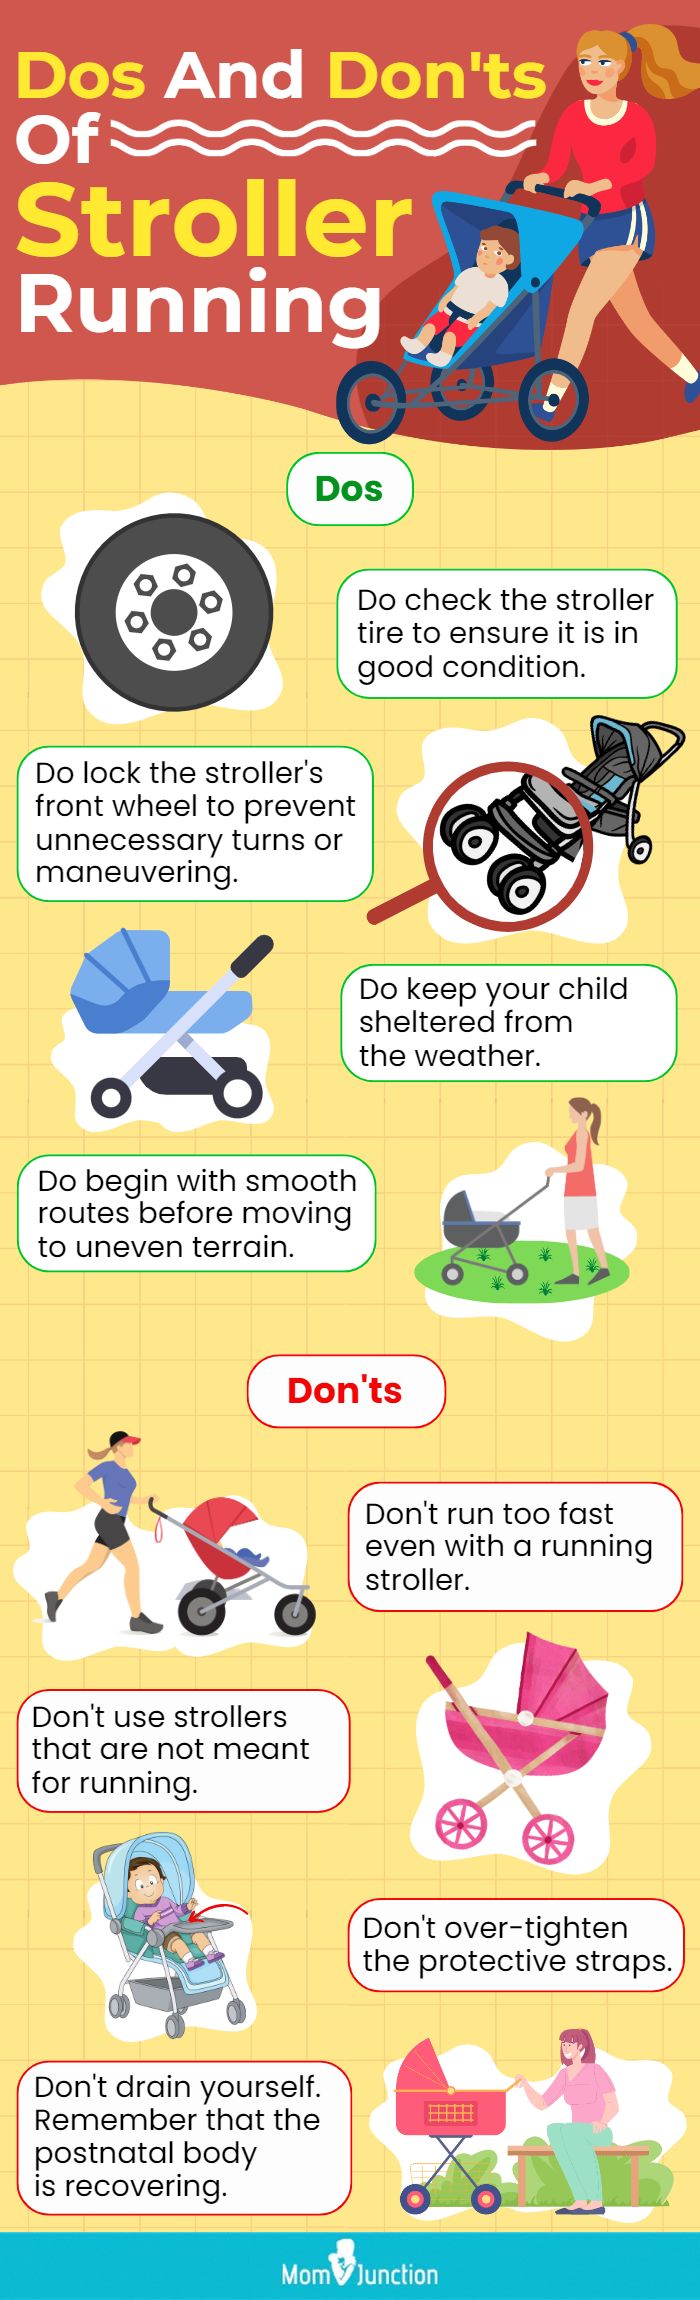 Dos And Don'ts Of Stroller Running